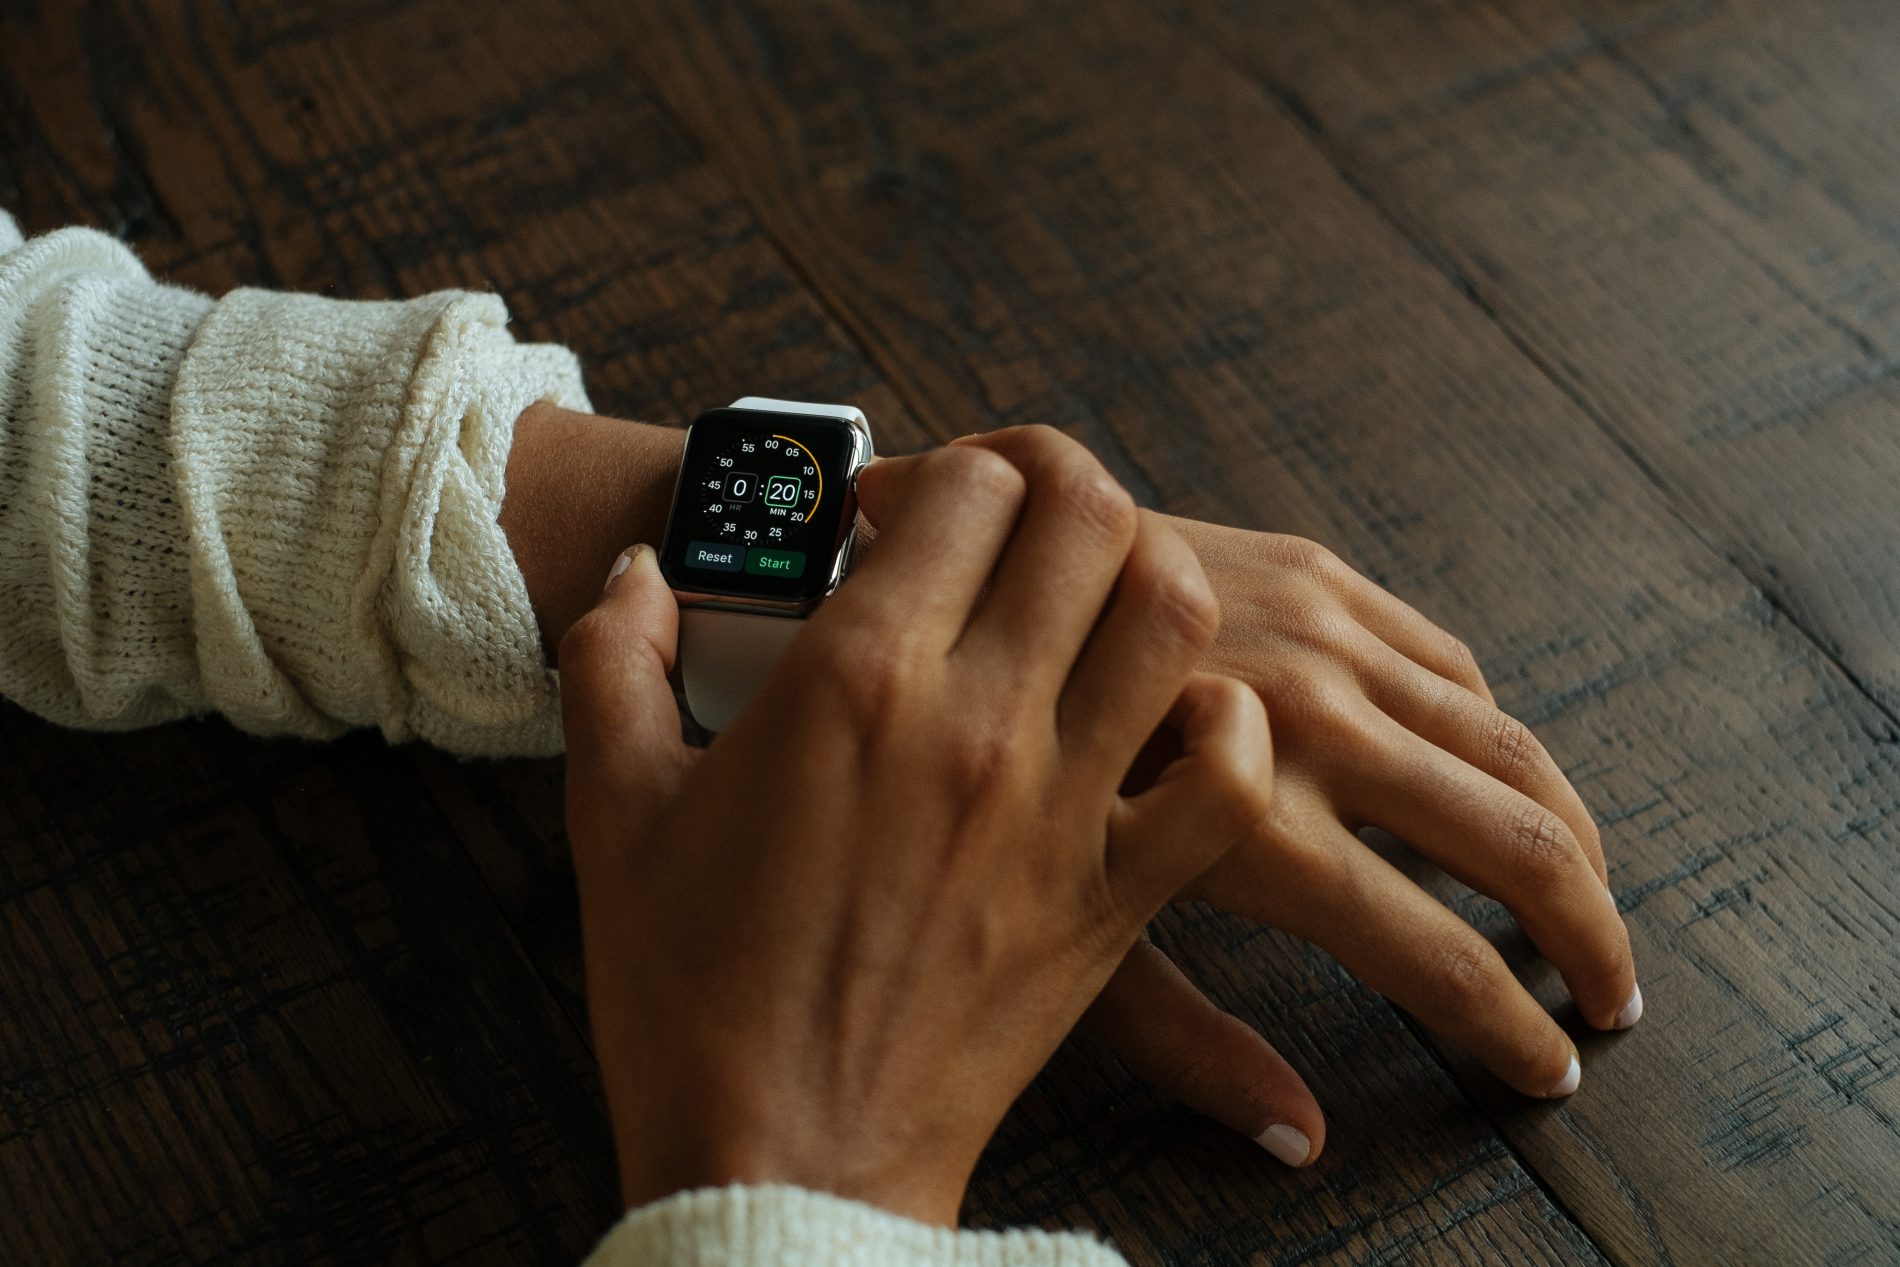 How to build more useful and engaging Apple Watch apps with watchOS 3